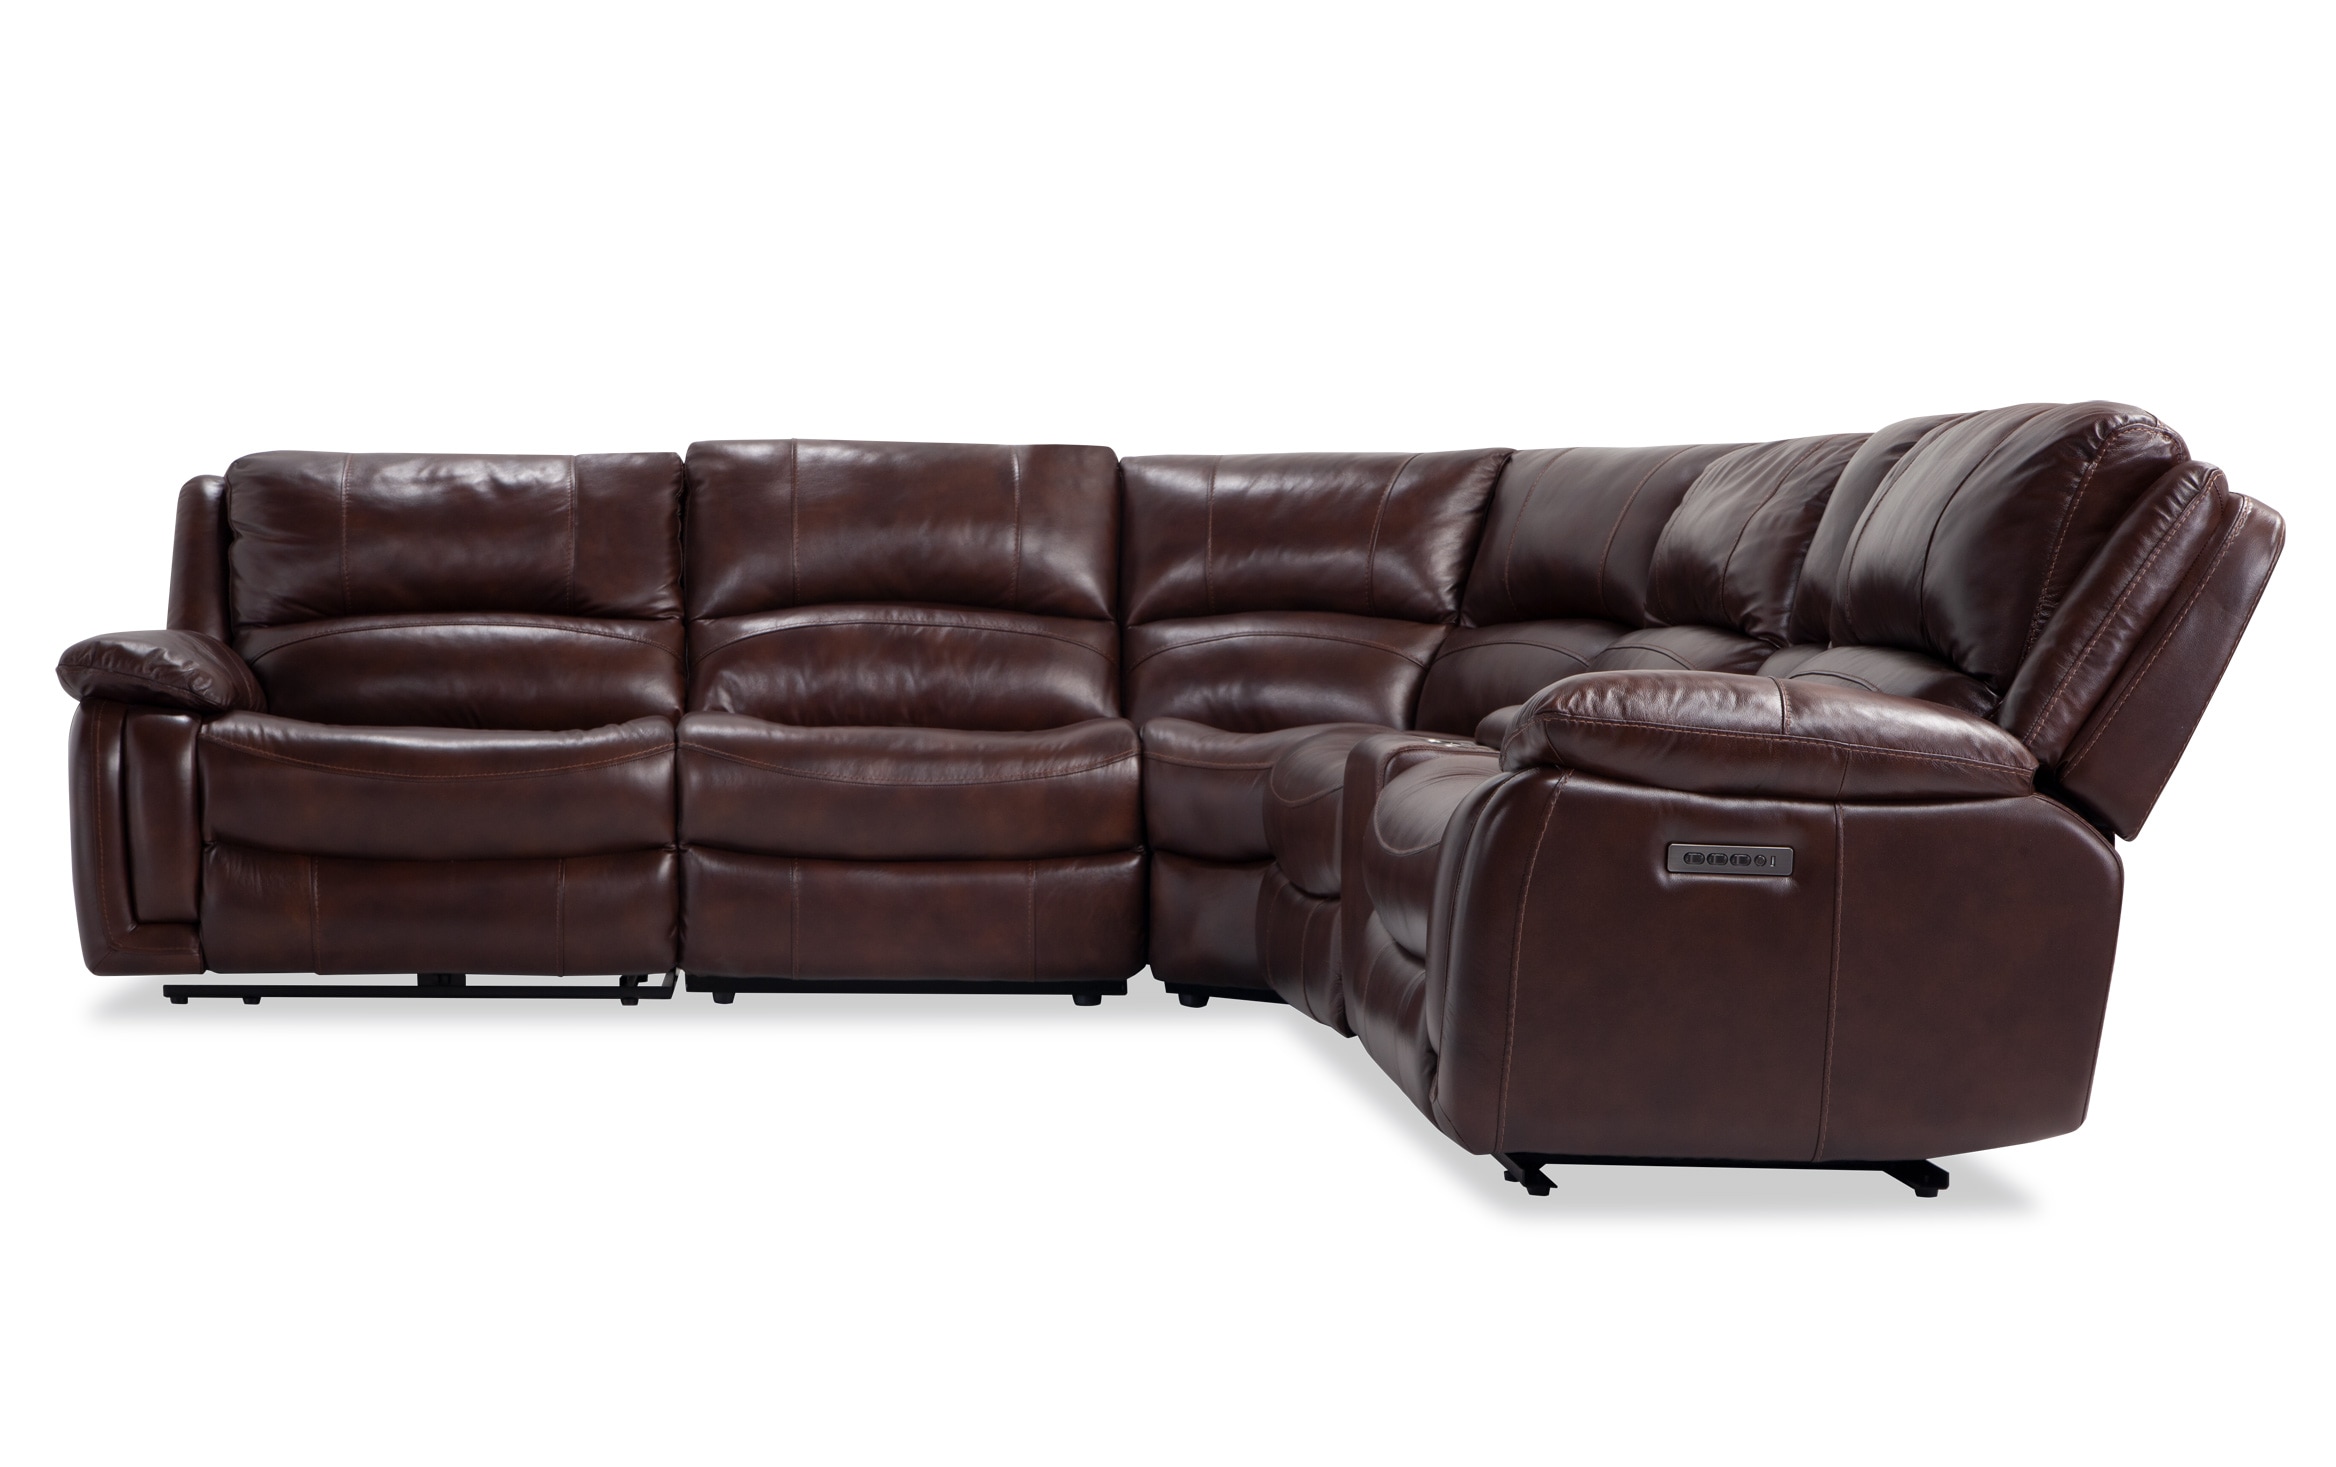 6 Piece Power Reclining Sectional, Leather Microfiber Sectional